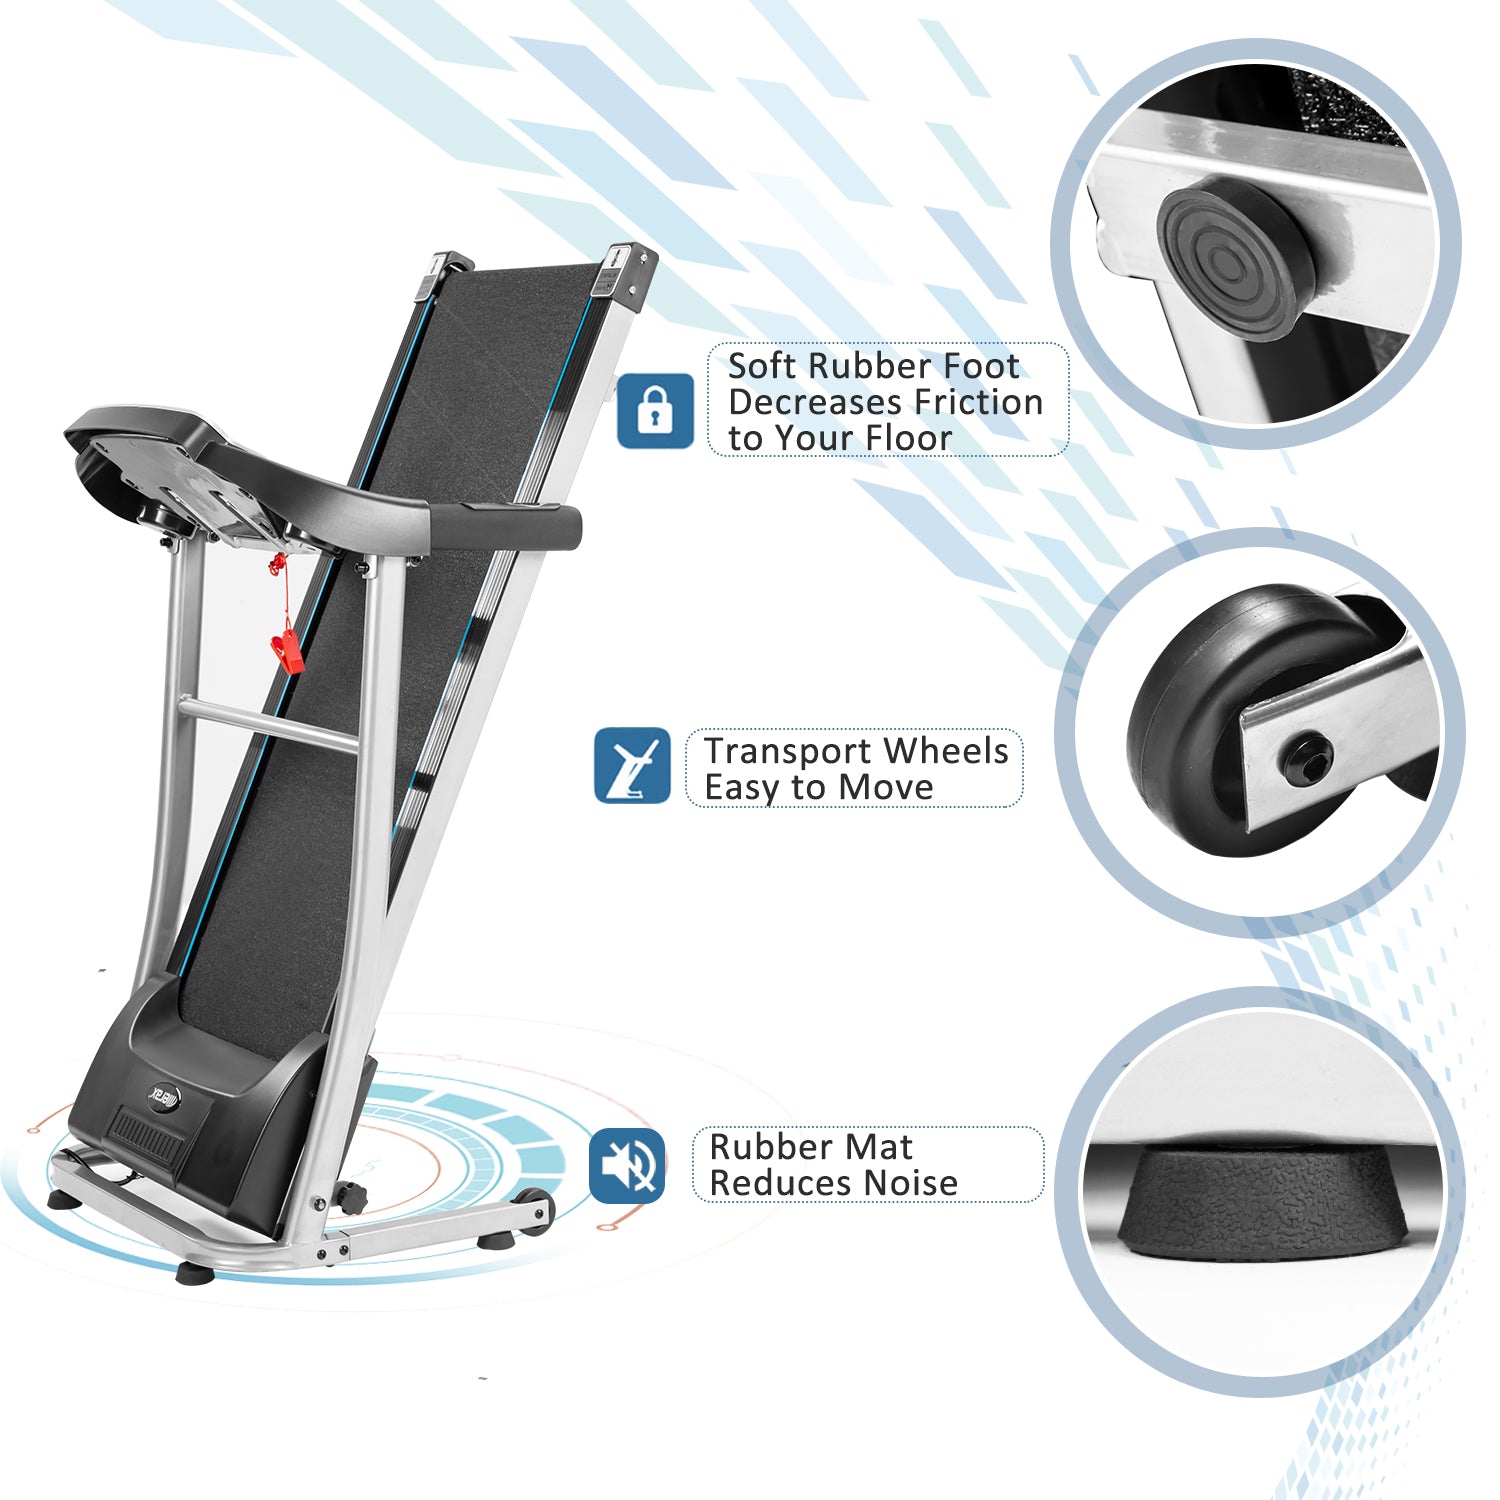 Electric Treadmill Motorized Running Machine 1.5 HP with Speaker AUX &USB Input 12 Programs